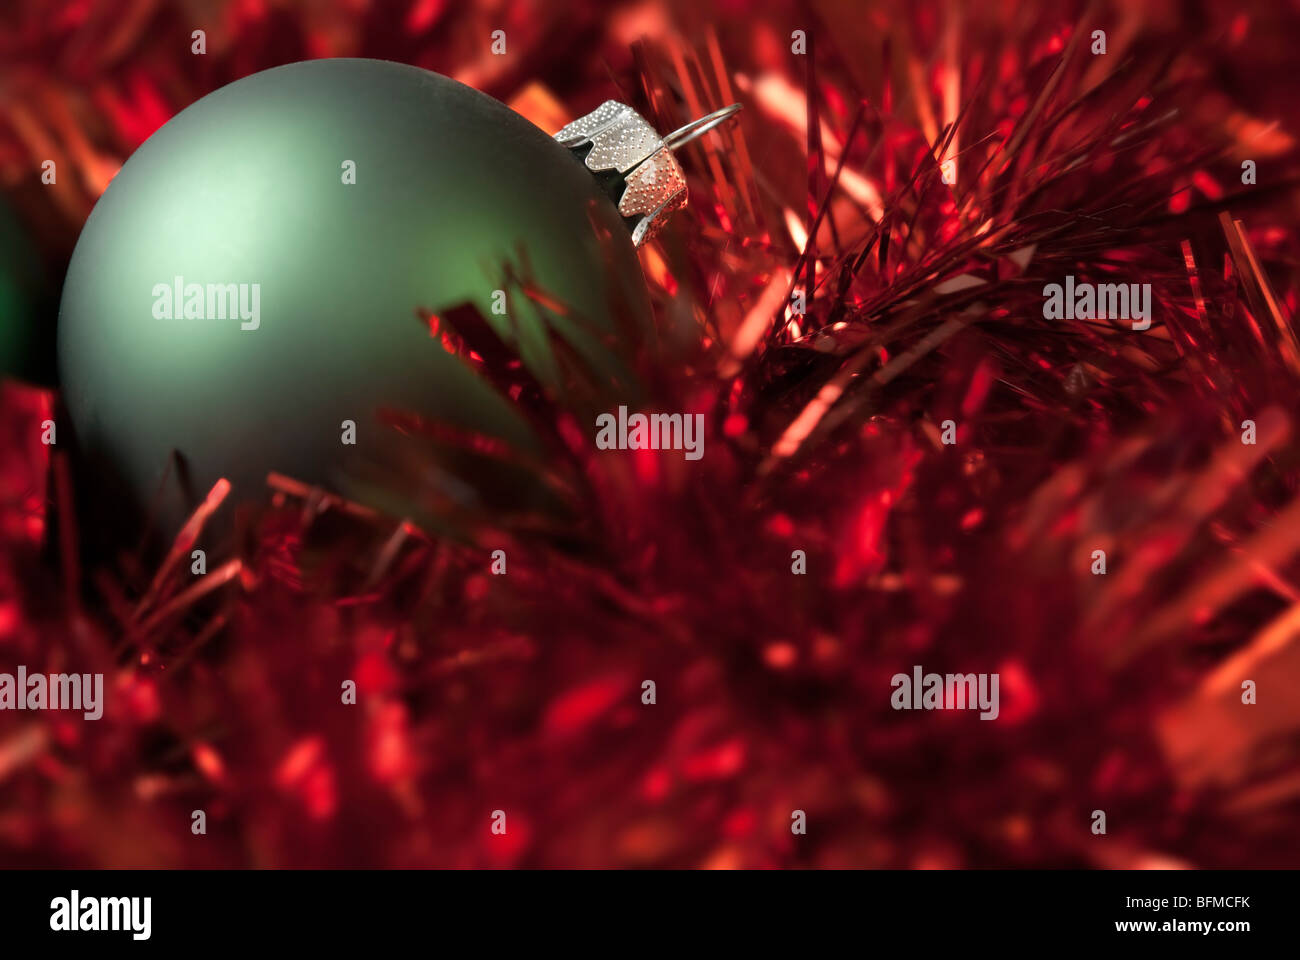 Green christmas ball on the red tinsel. aRGB. Stock Photo